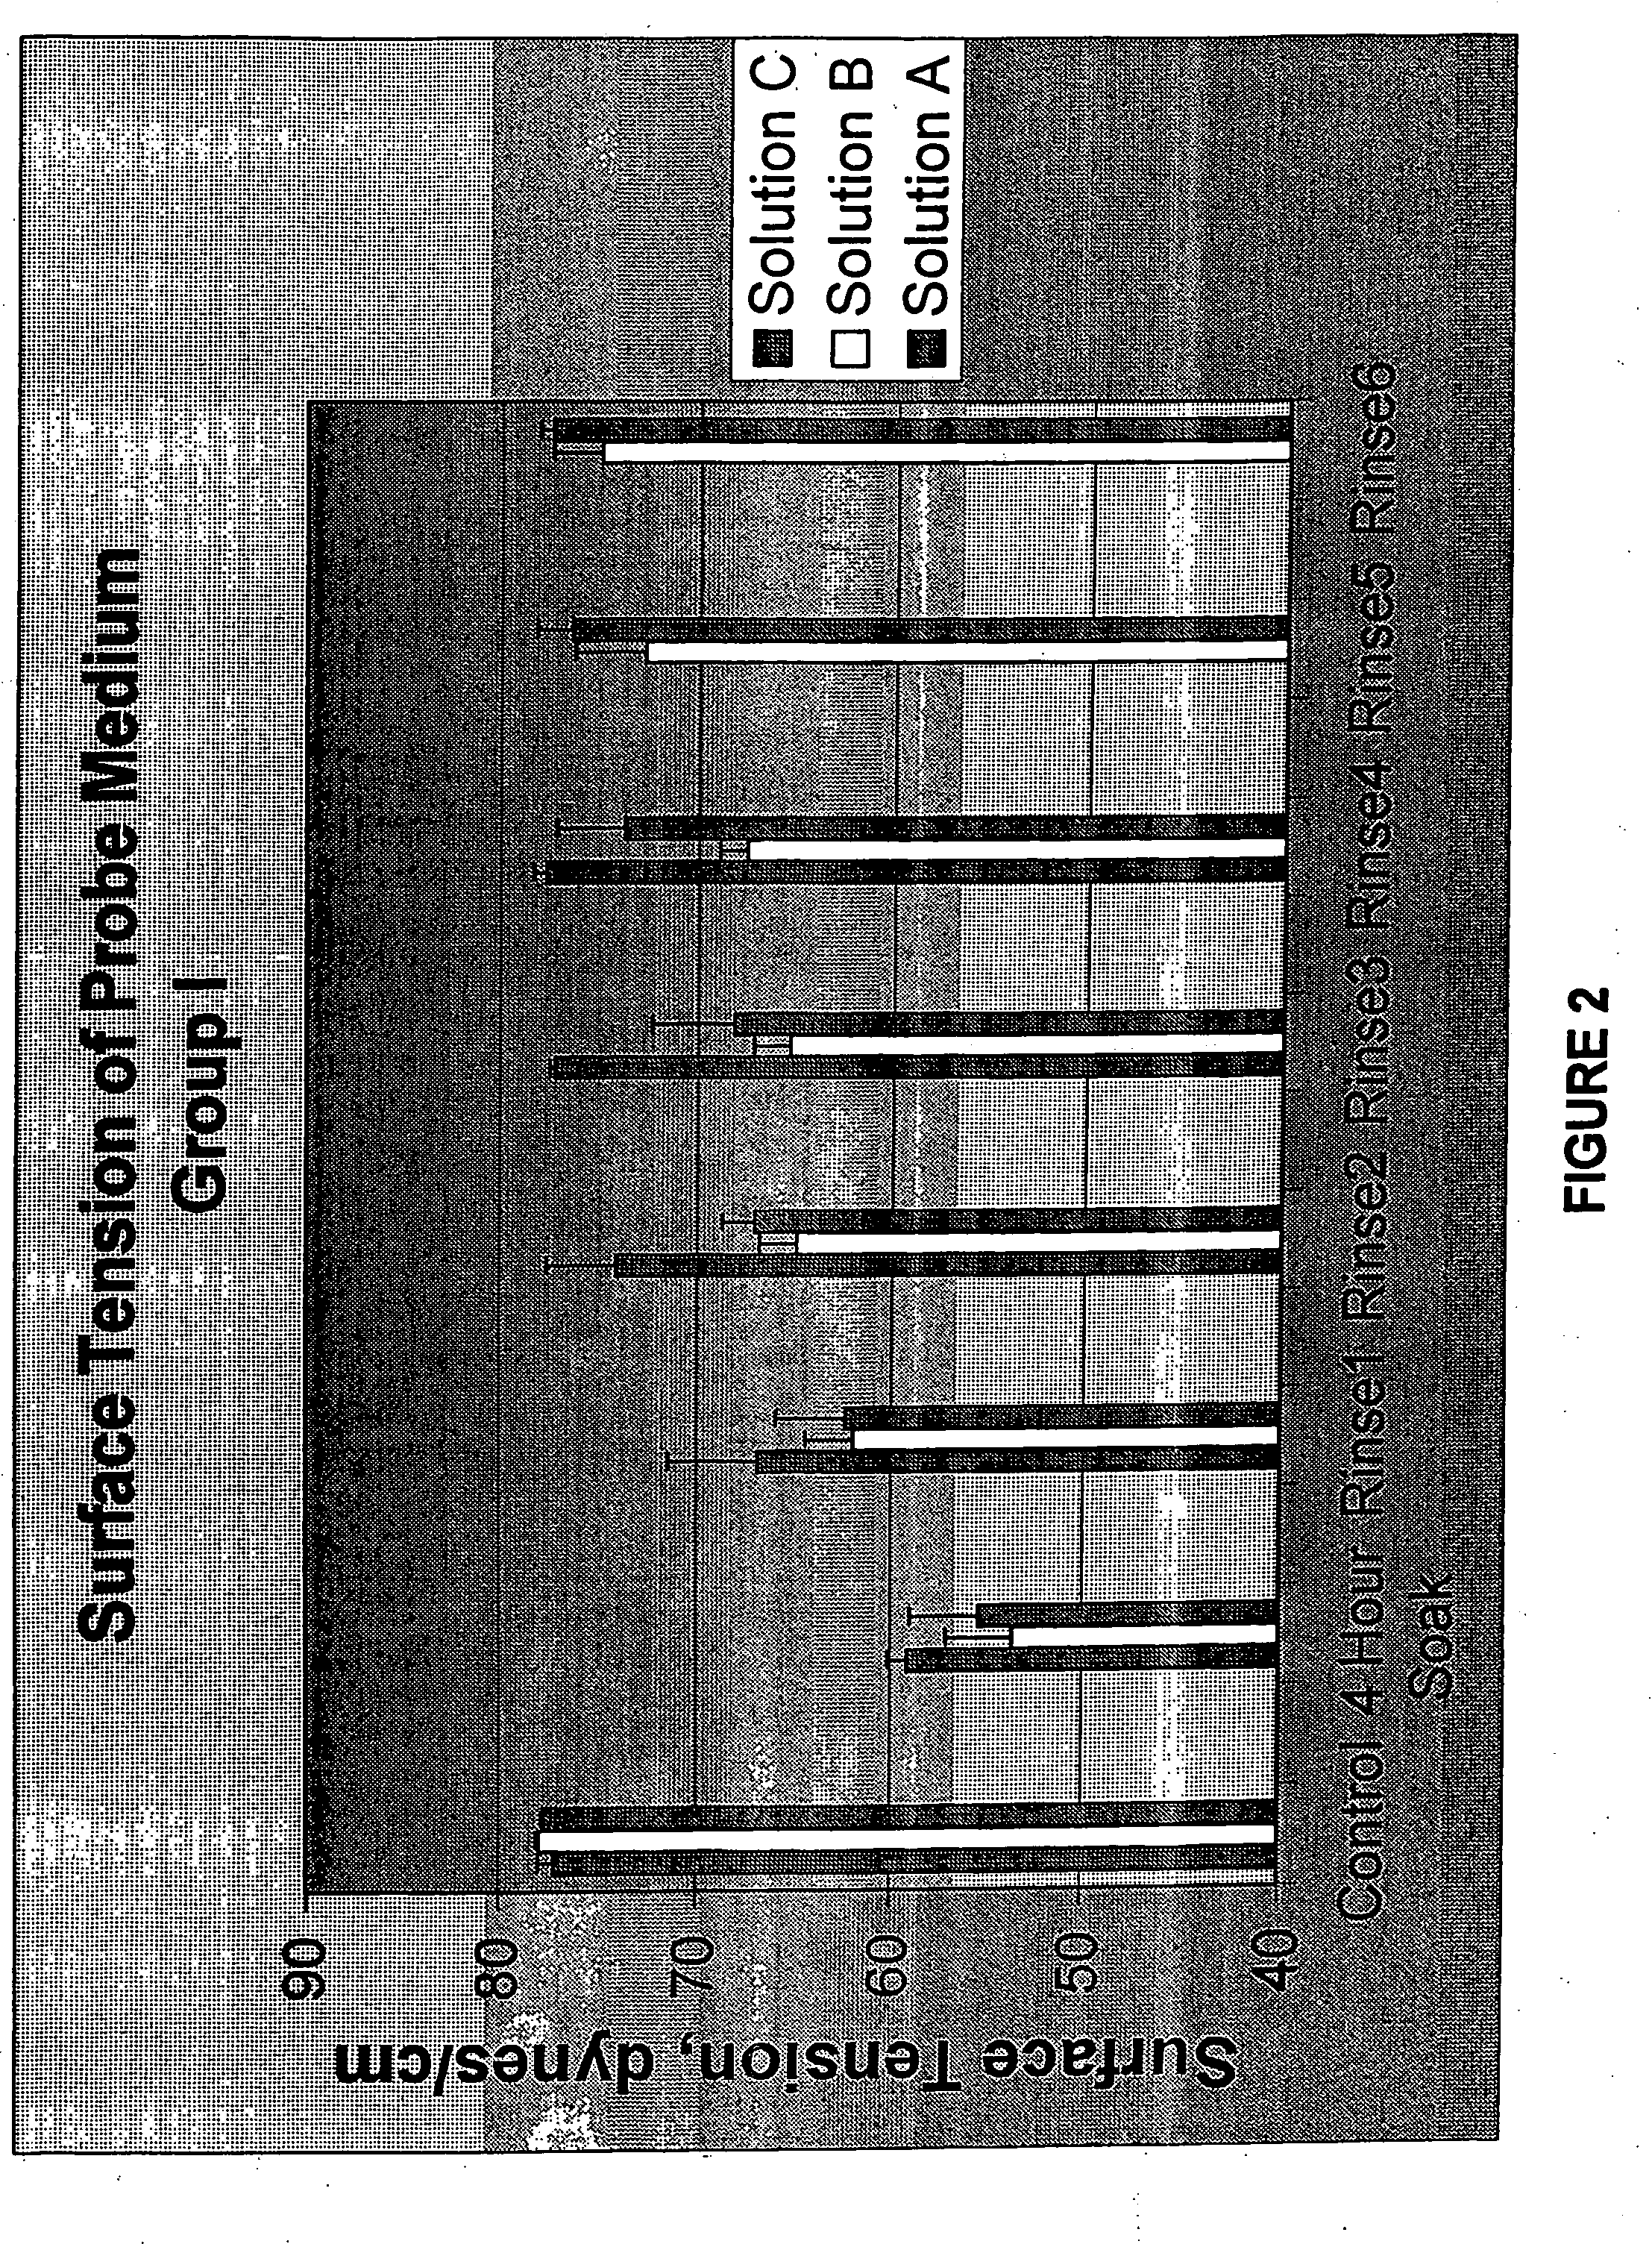 Method and composition for contact lenses